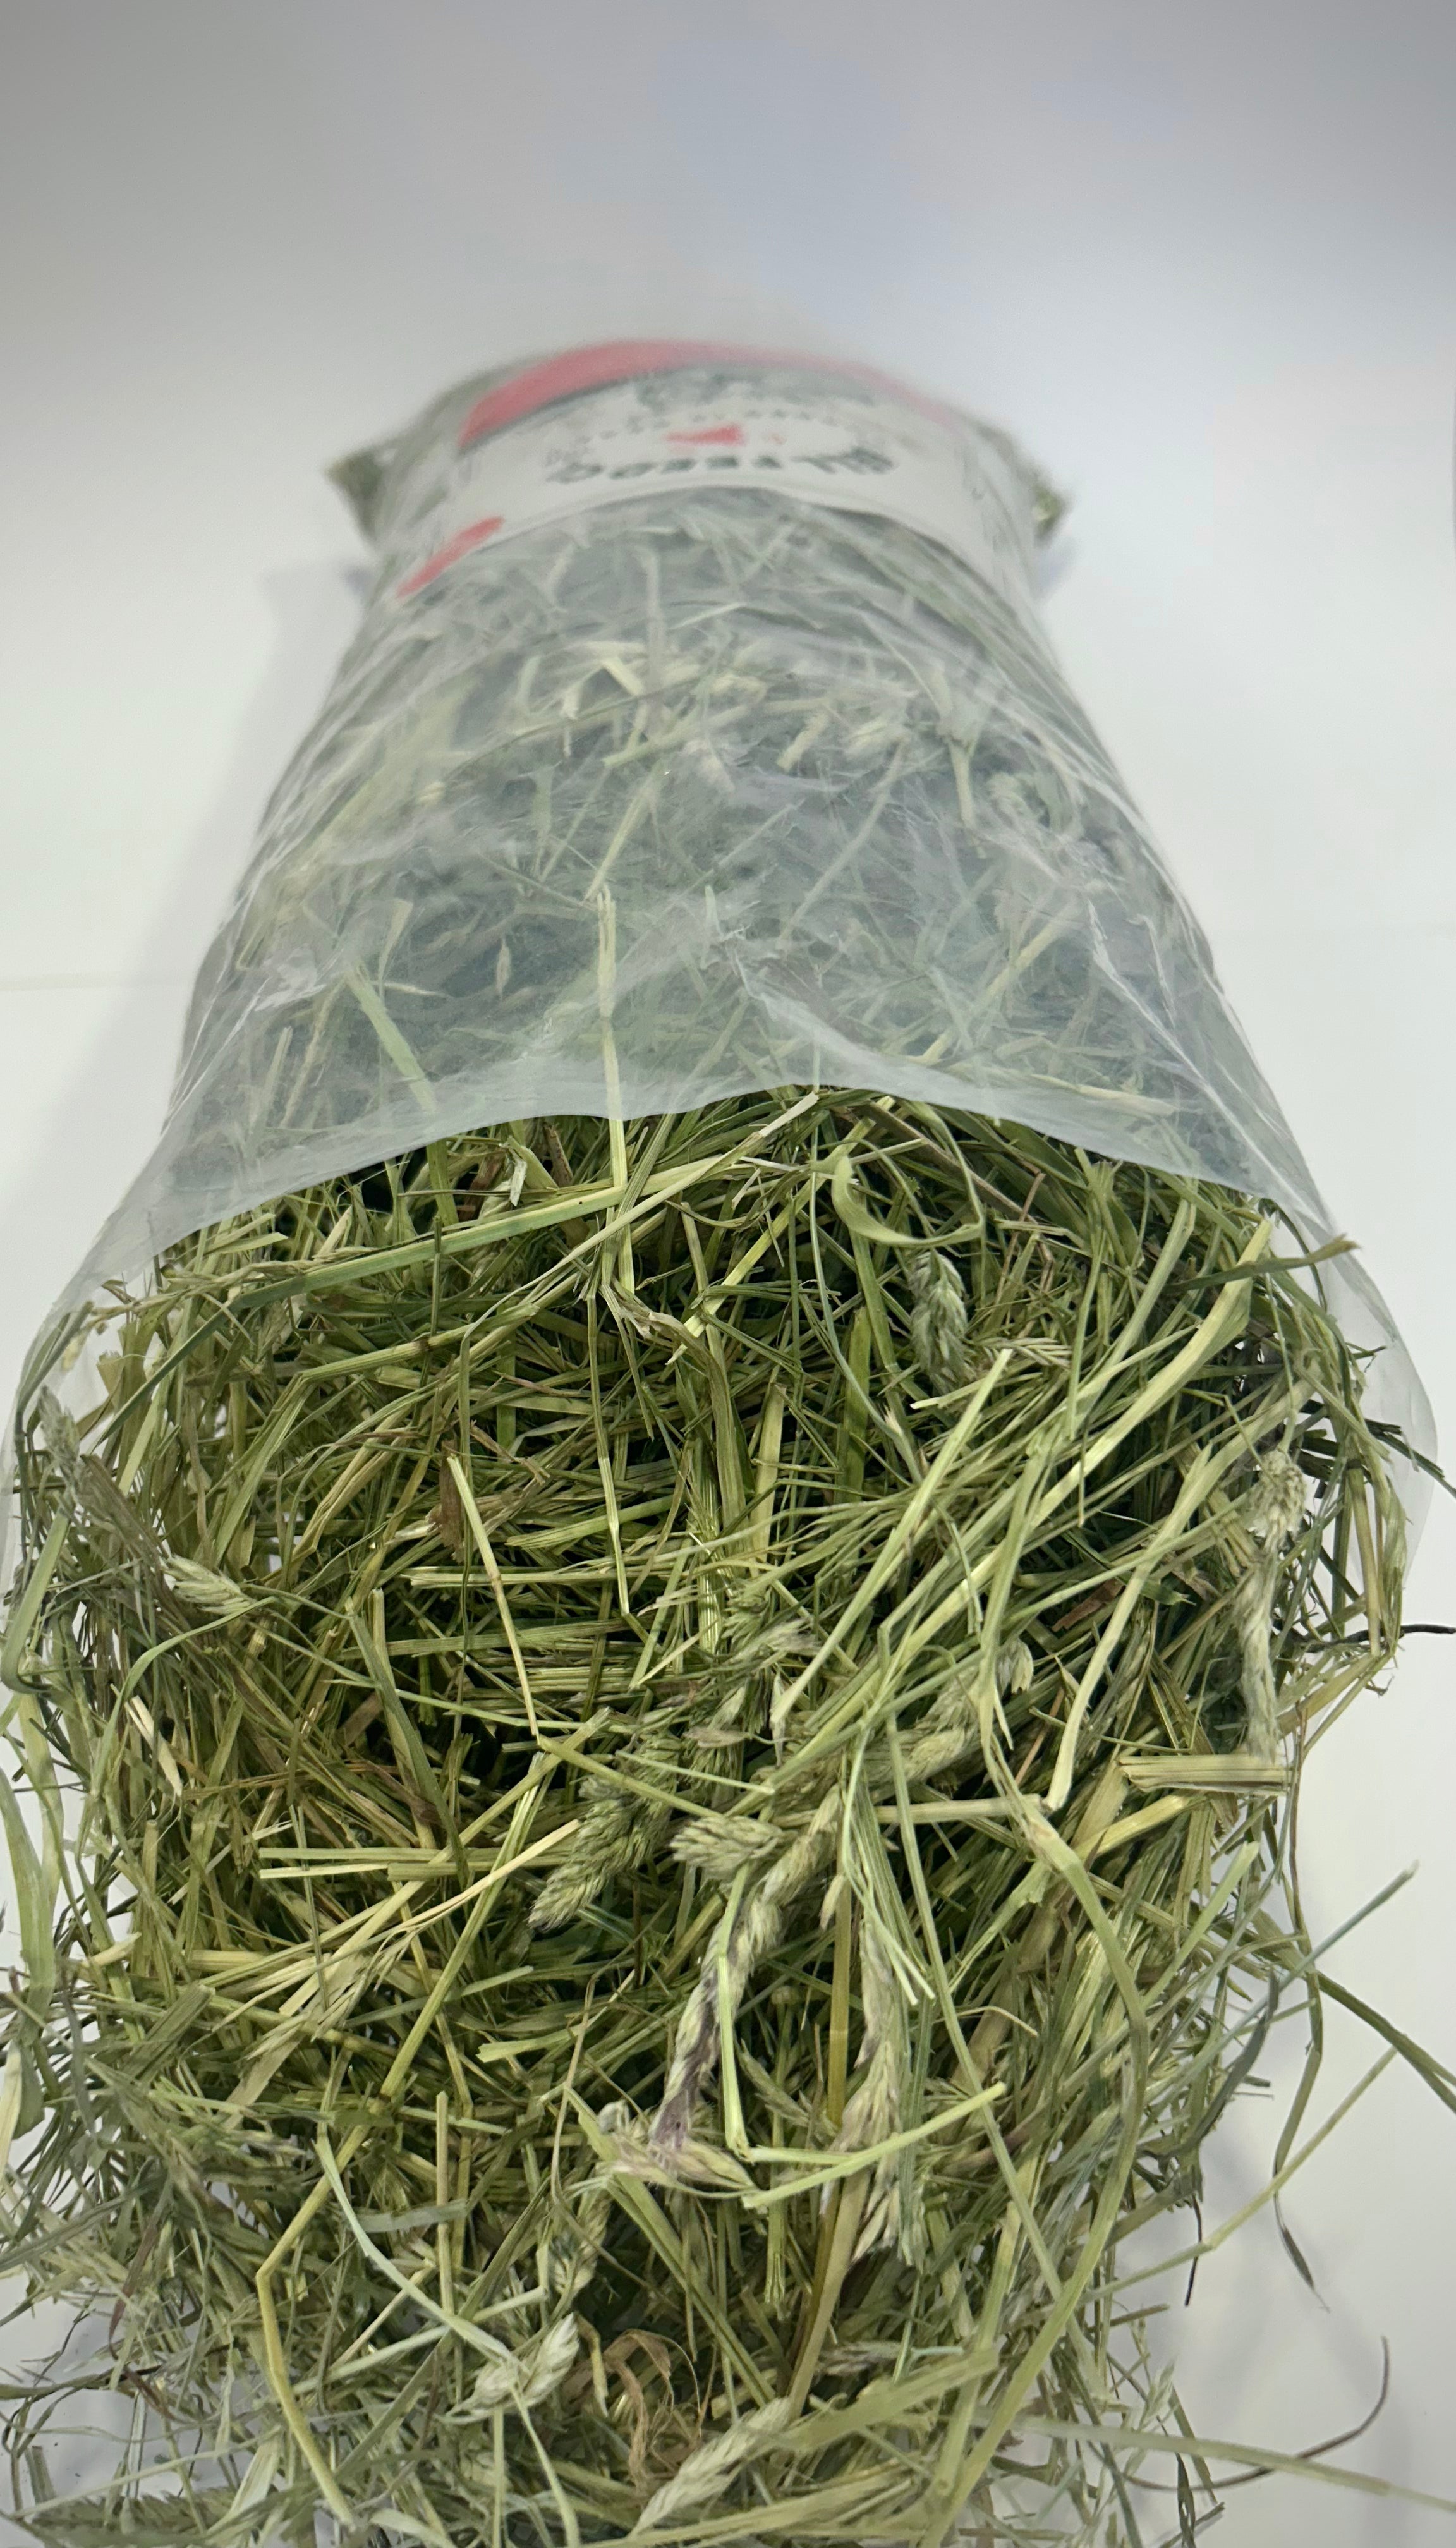 Orchard Grass Small Pet Hay